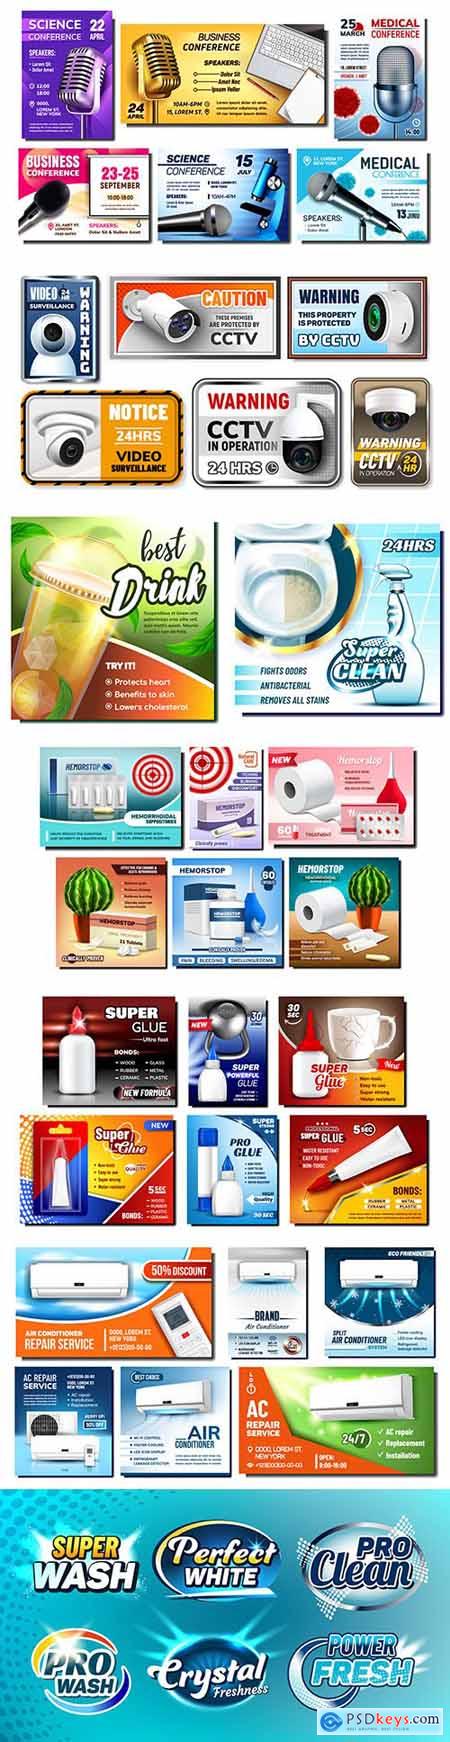 Creative advertising posters and banners to promote trade